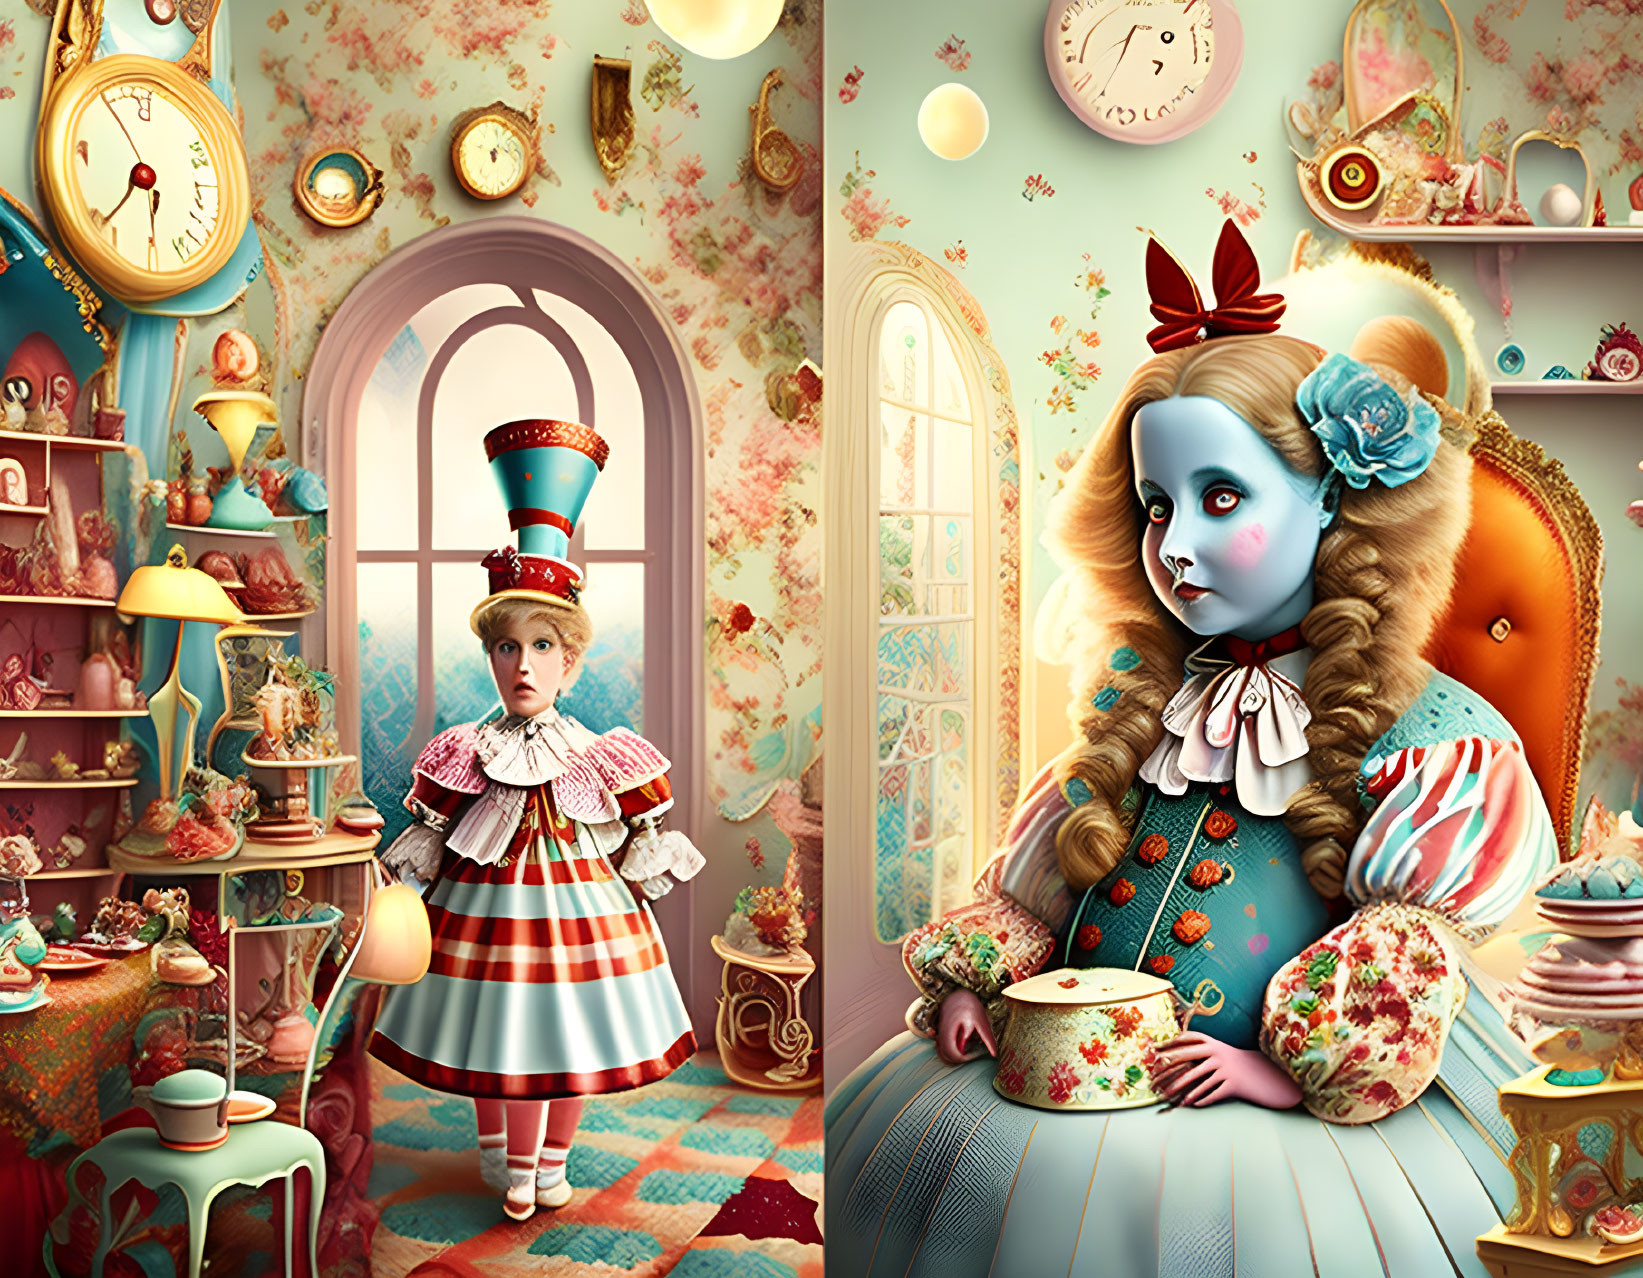 Alice in wonderland syndrome (AIWS)